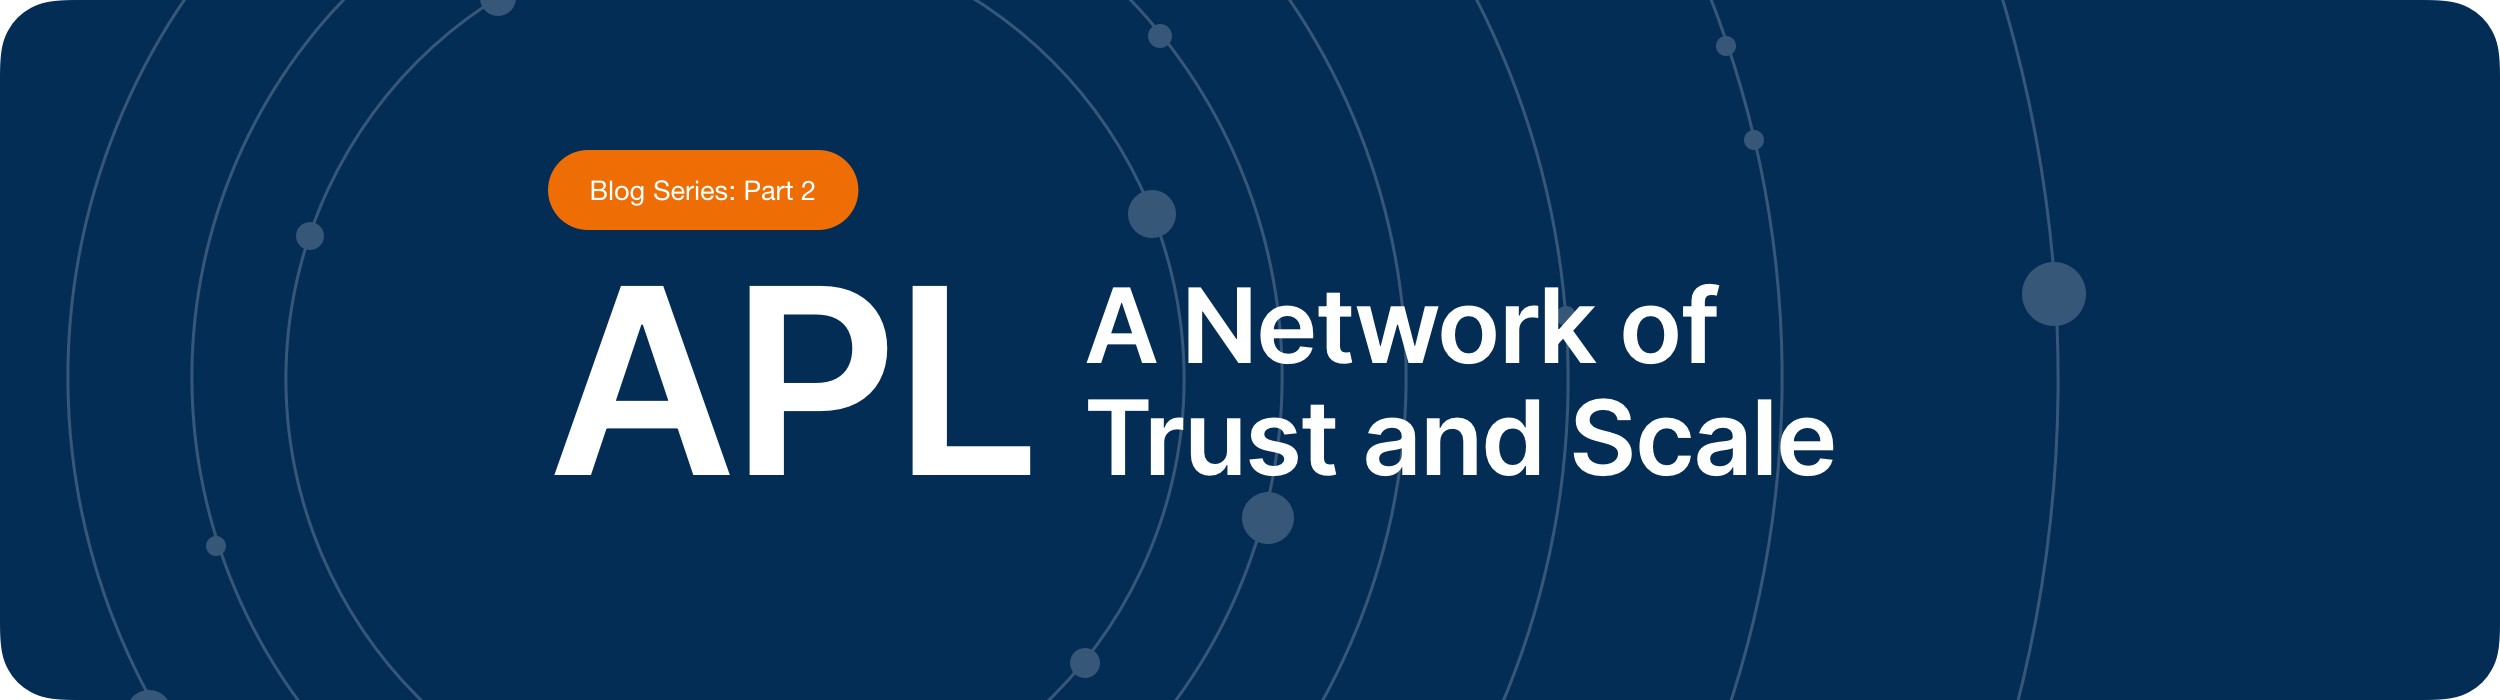 A Network of Trust and Scale